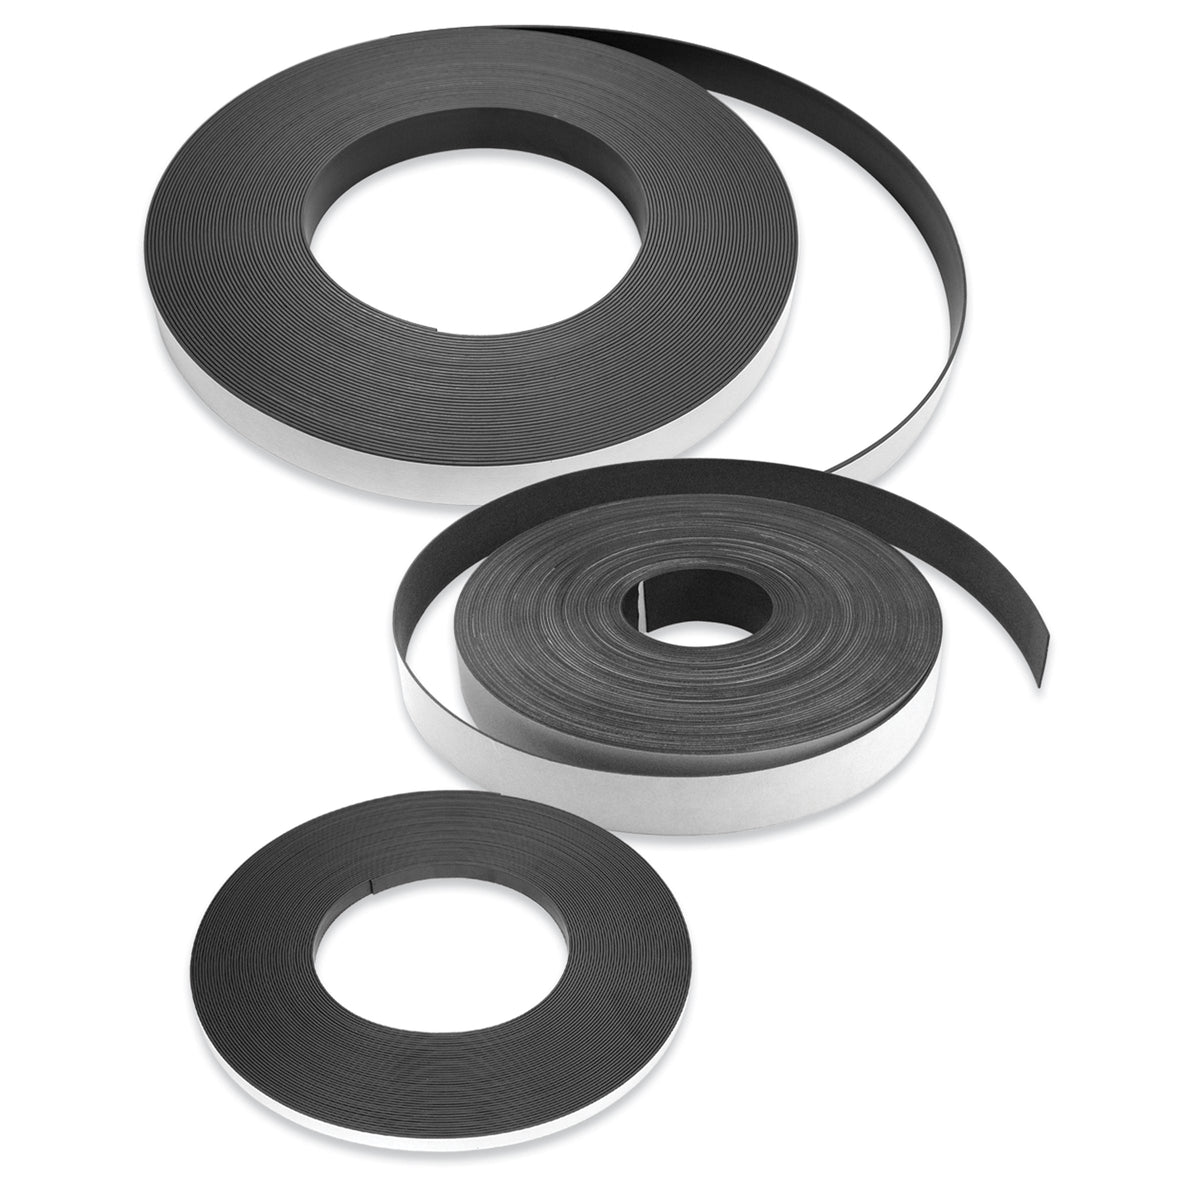 Flexible Magnetic Tape 1/2 x 25' Roll